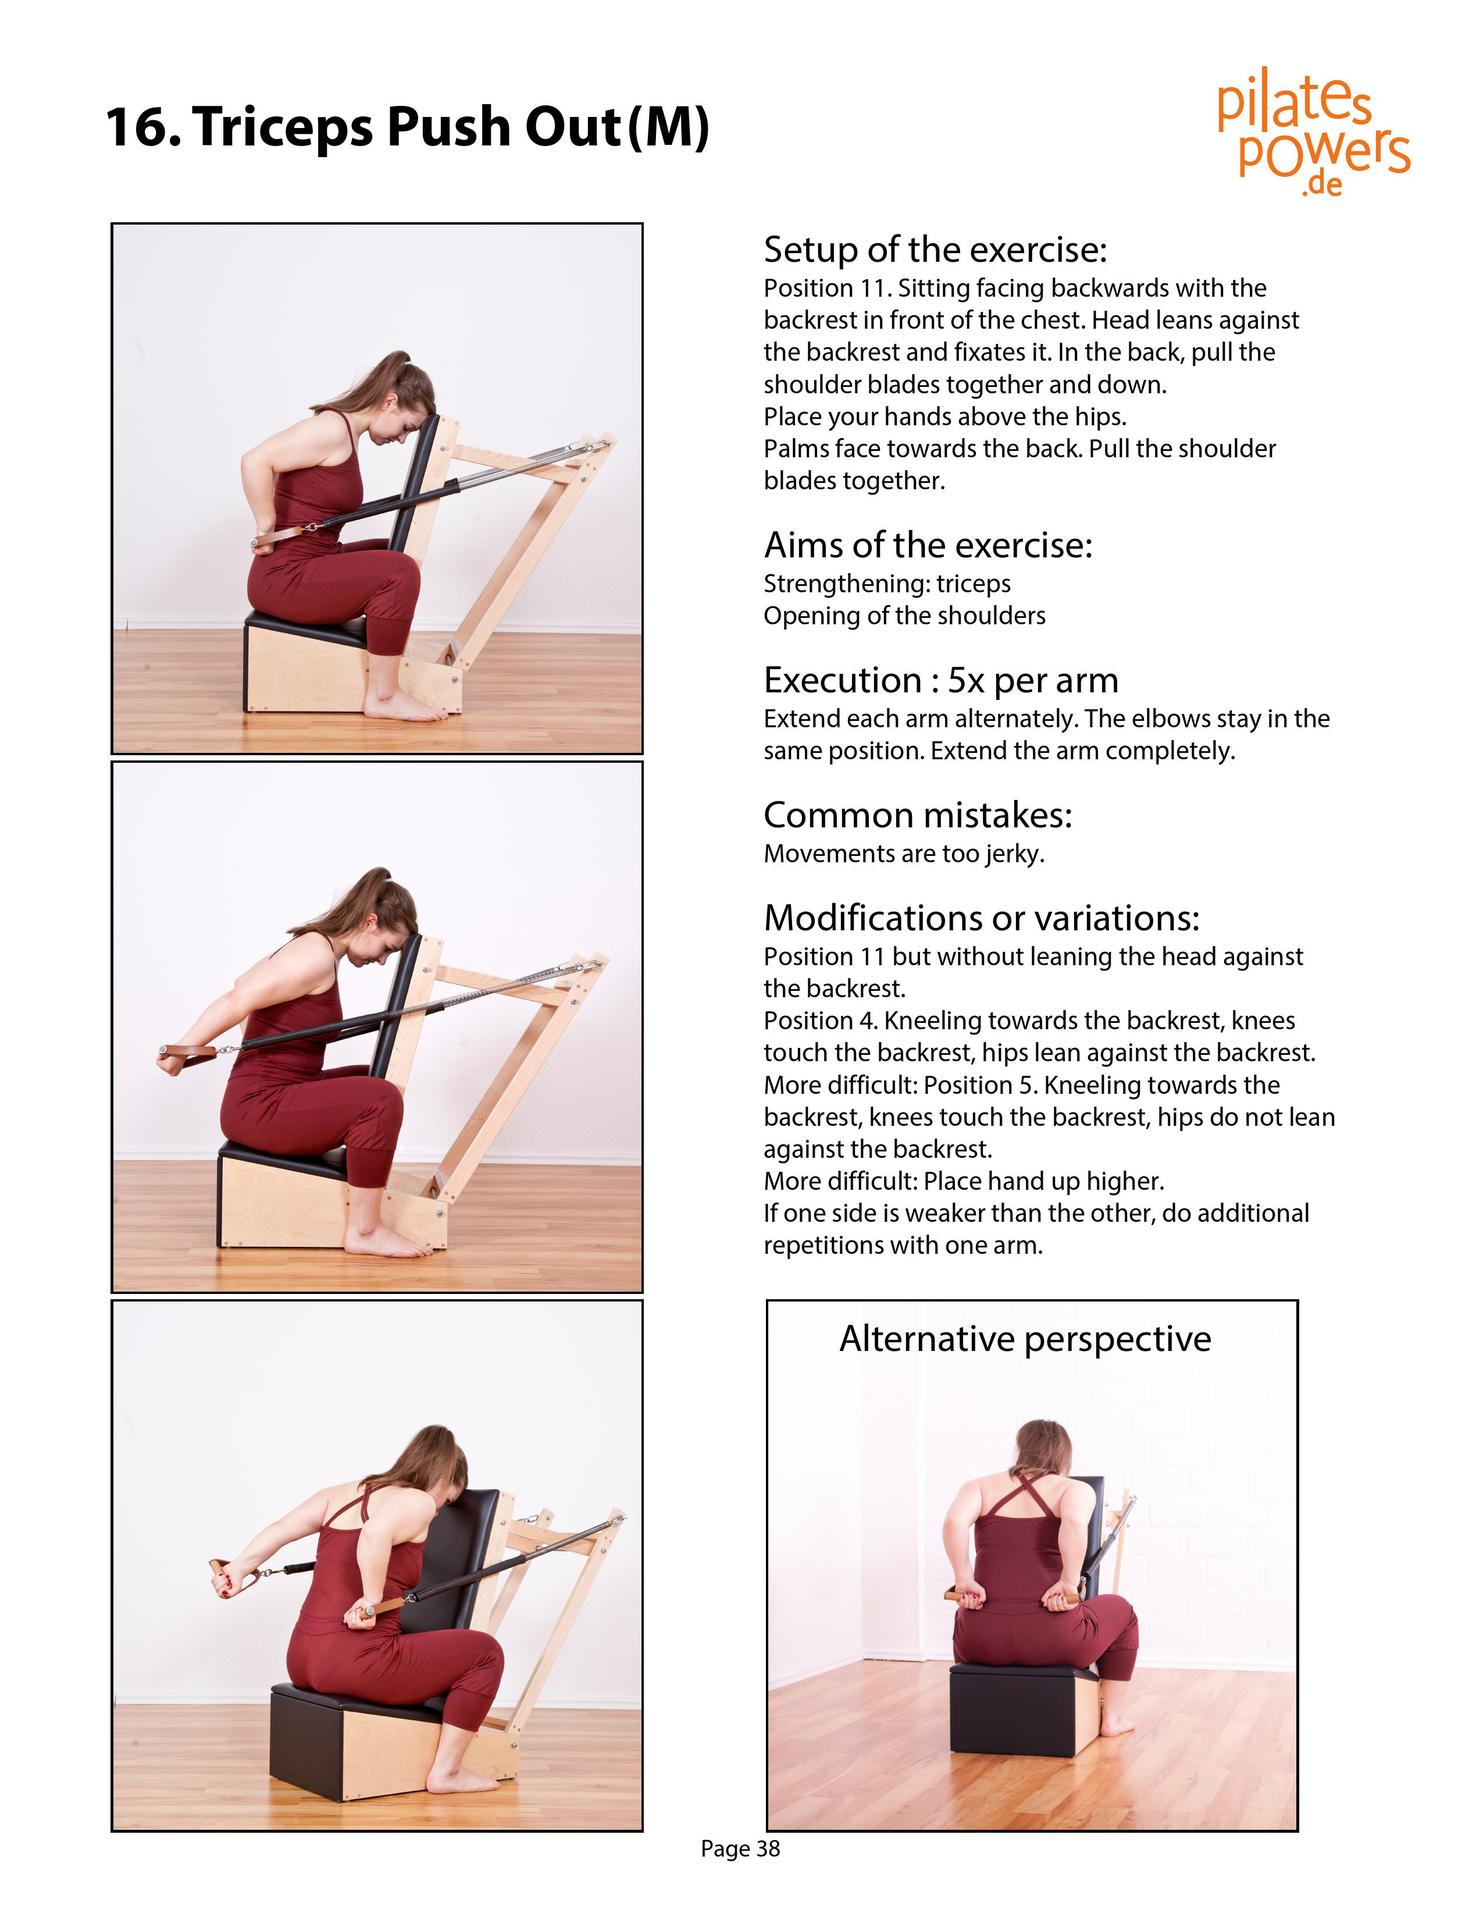 The Pilates Arm Chair The 42 most effective exercises - photo 38